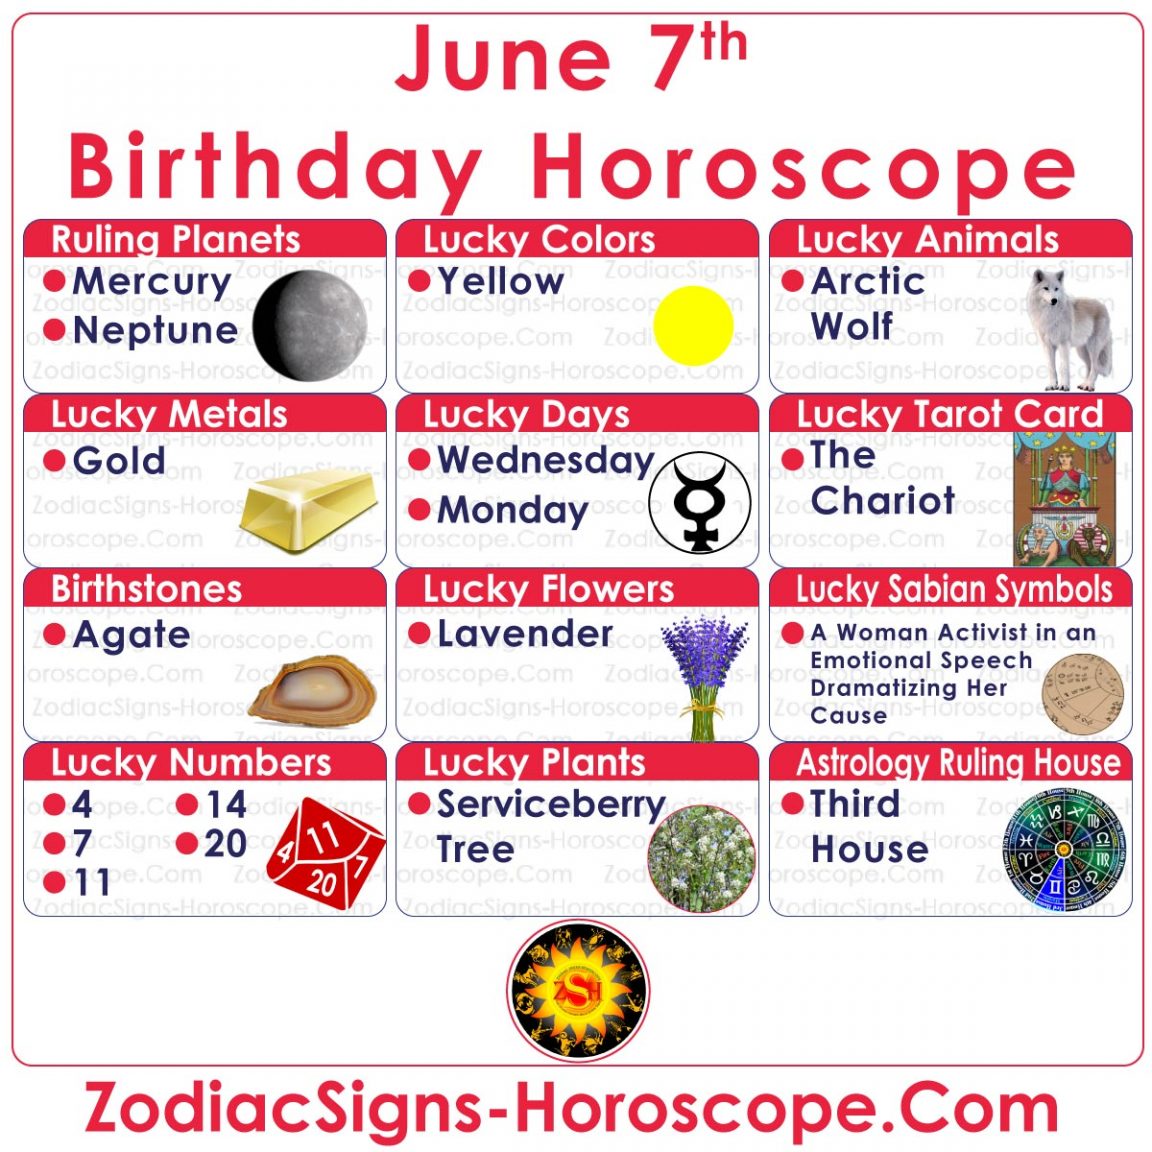 what is june 20 astrology sign